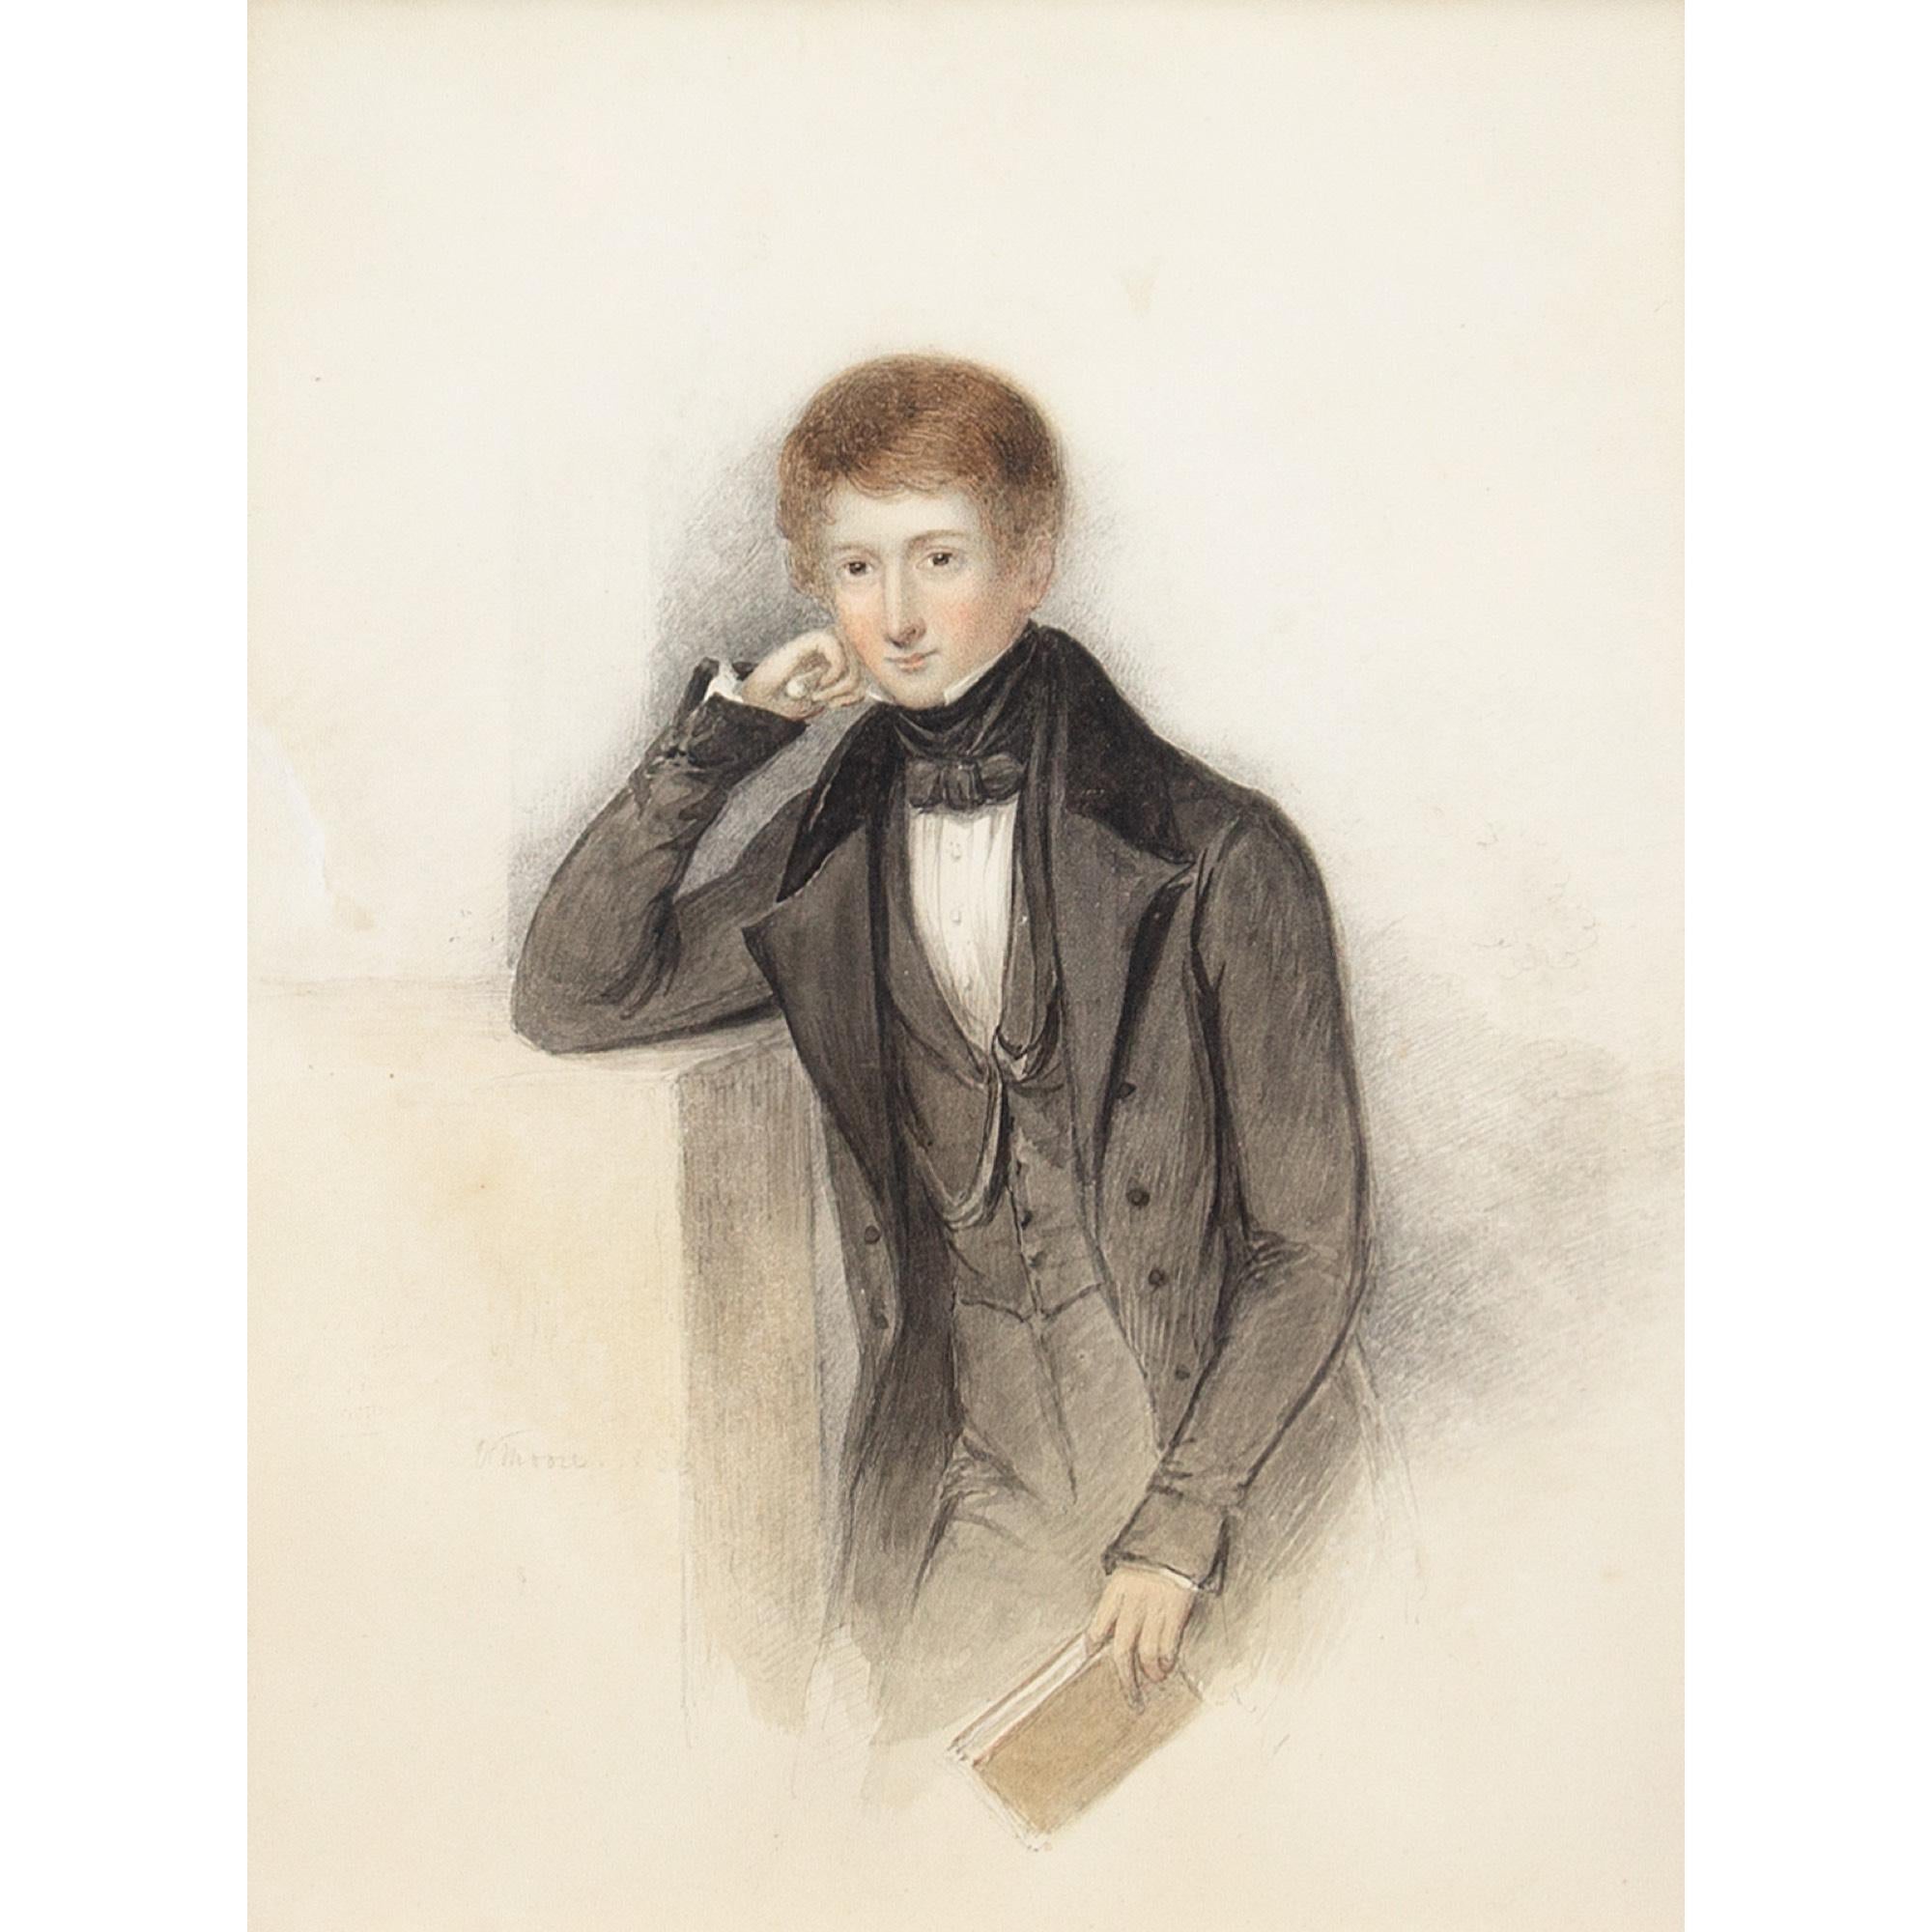 This fine portrait by British artist William Moore (1790-1851) depicts a young man holding a book. He’s wearing a white shirt, black necktie, waistcoat and unbuttoned frock coat.

During the 1830s, the frock coat tended to be worn for informal